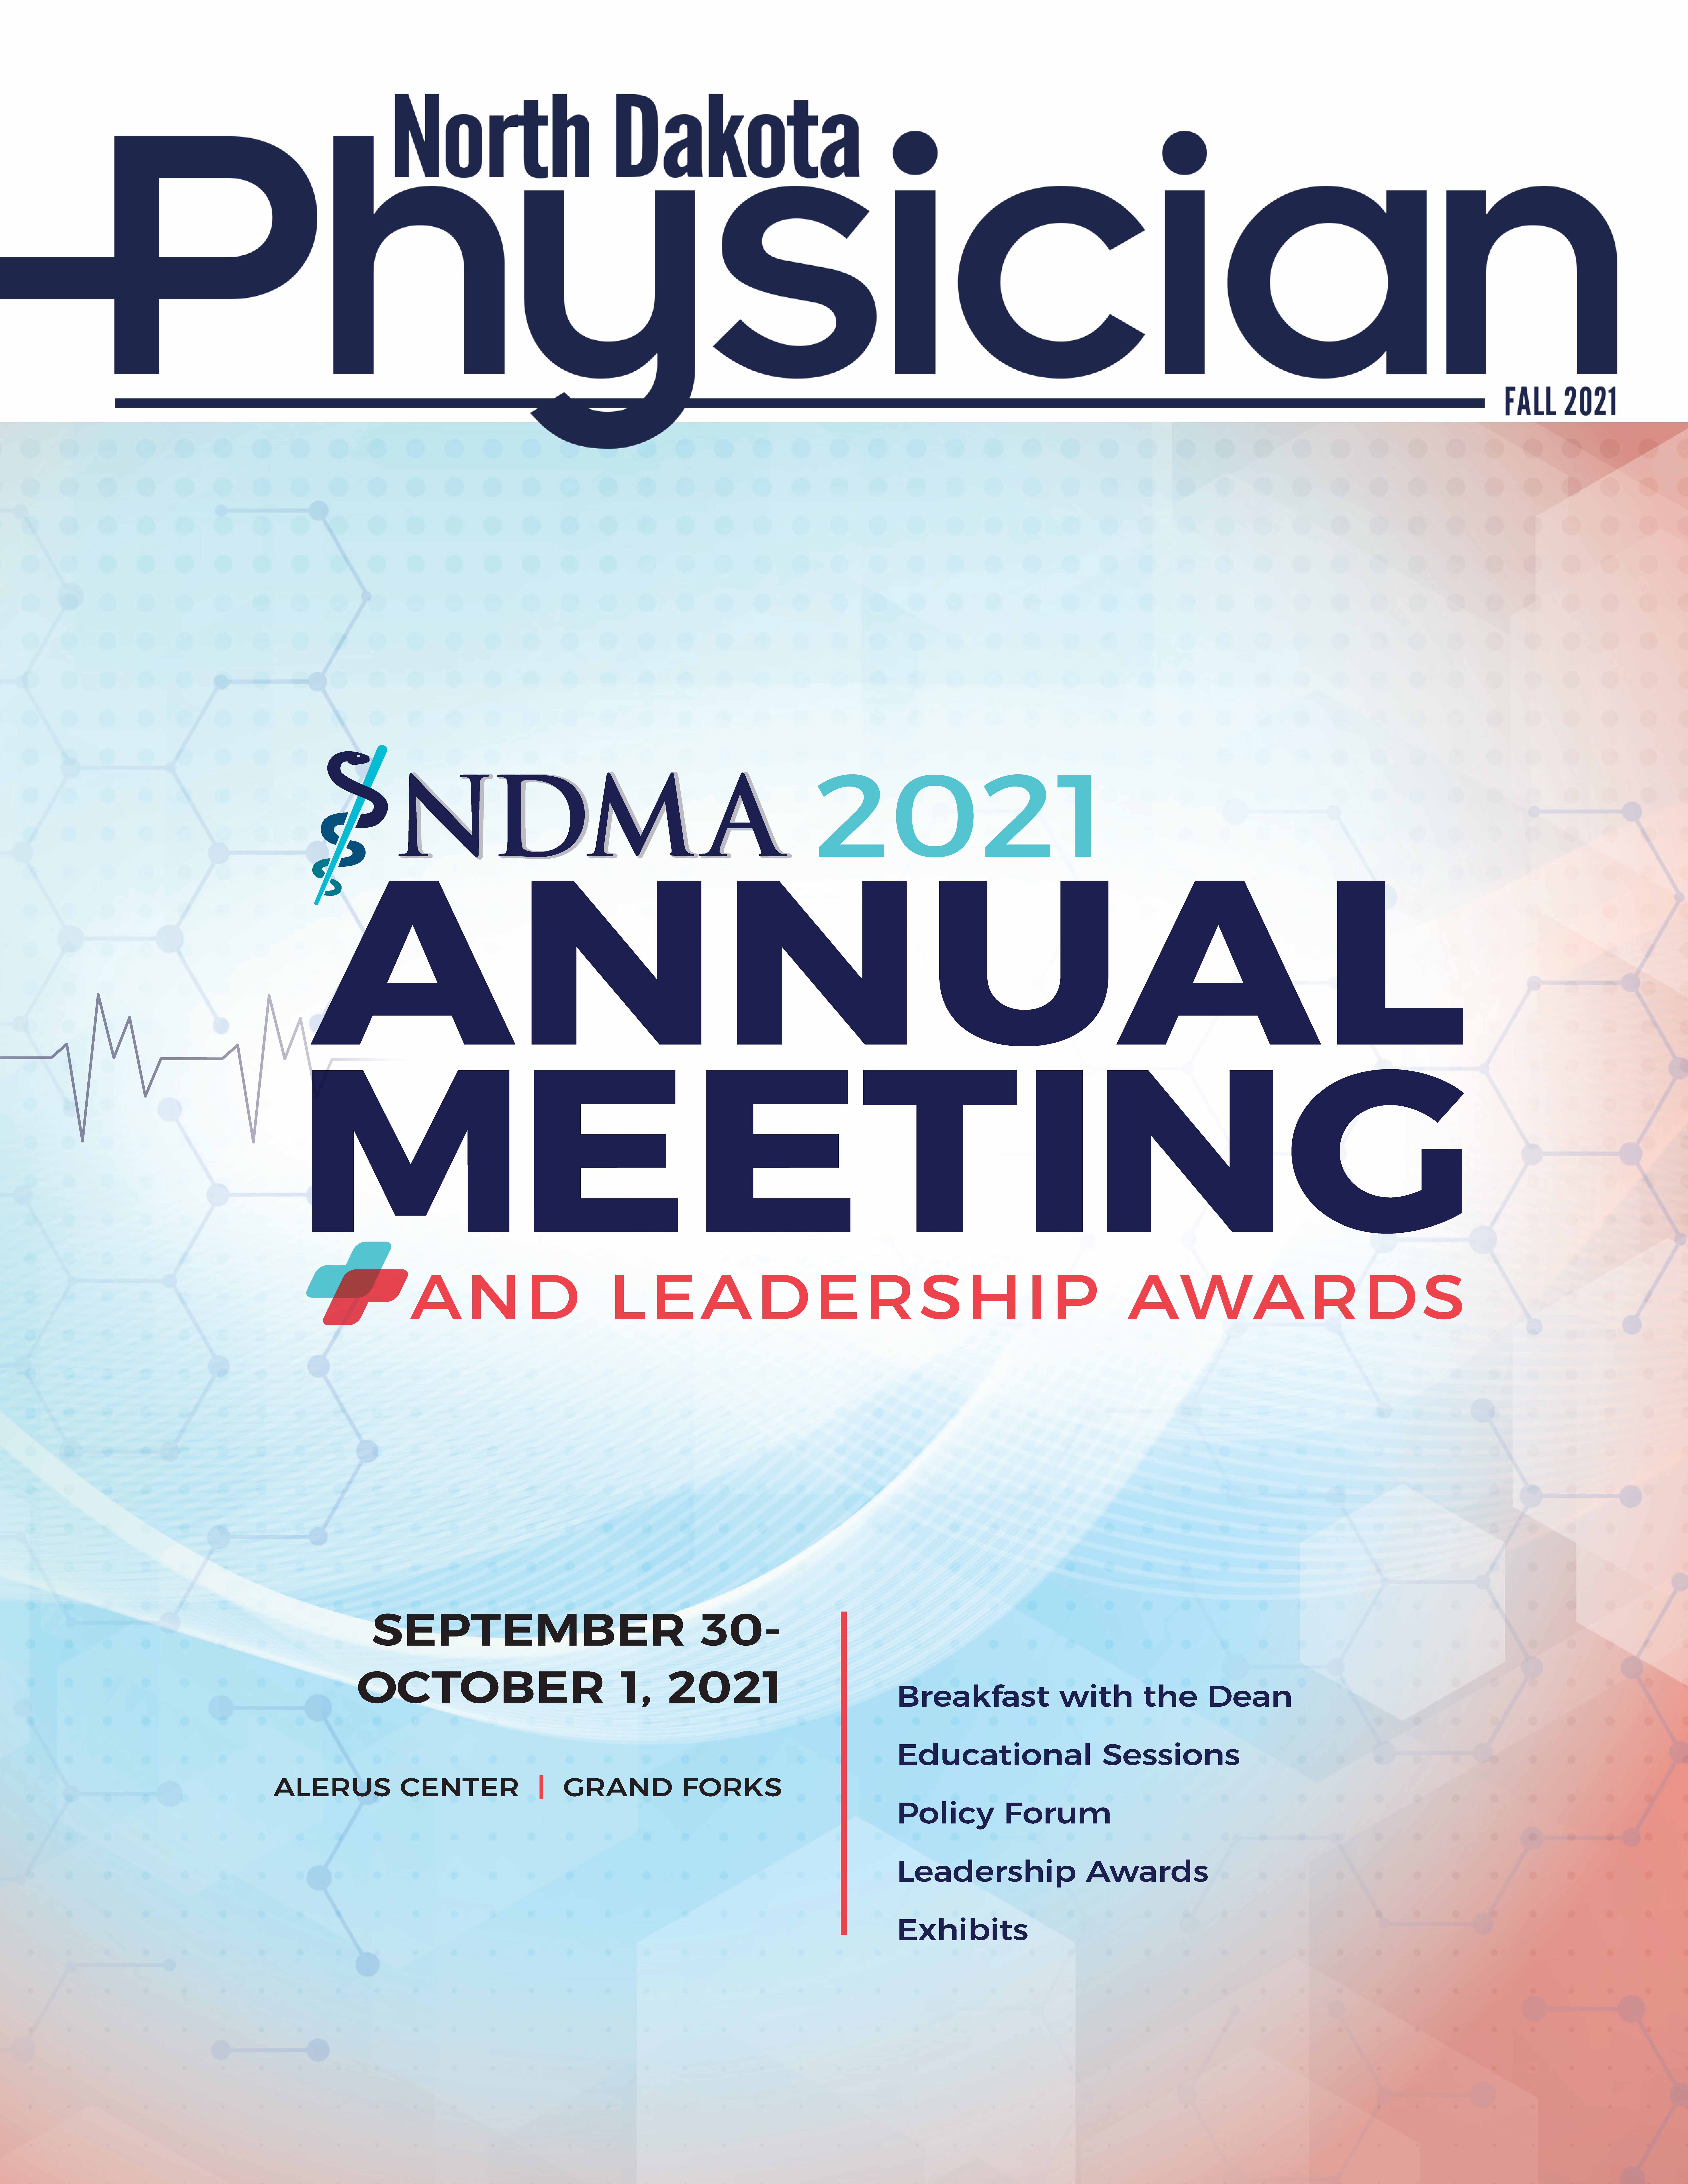 ND Physician Fall 2021: Annual Meeting Edition magazine cover